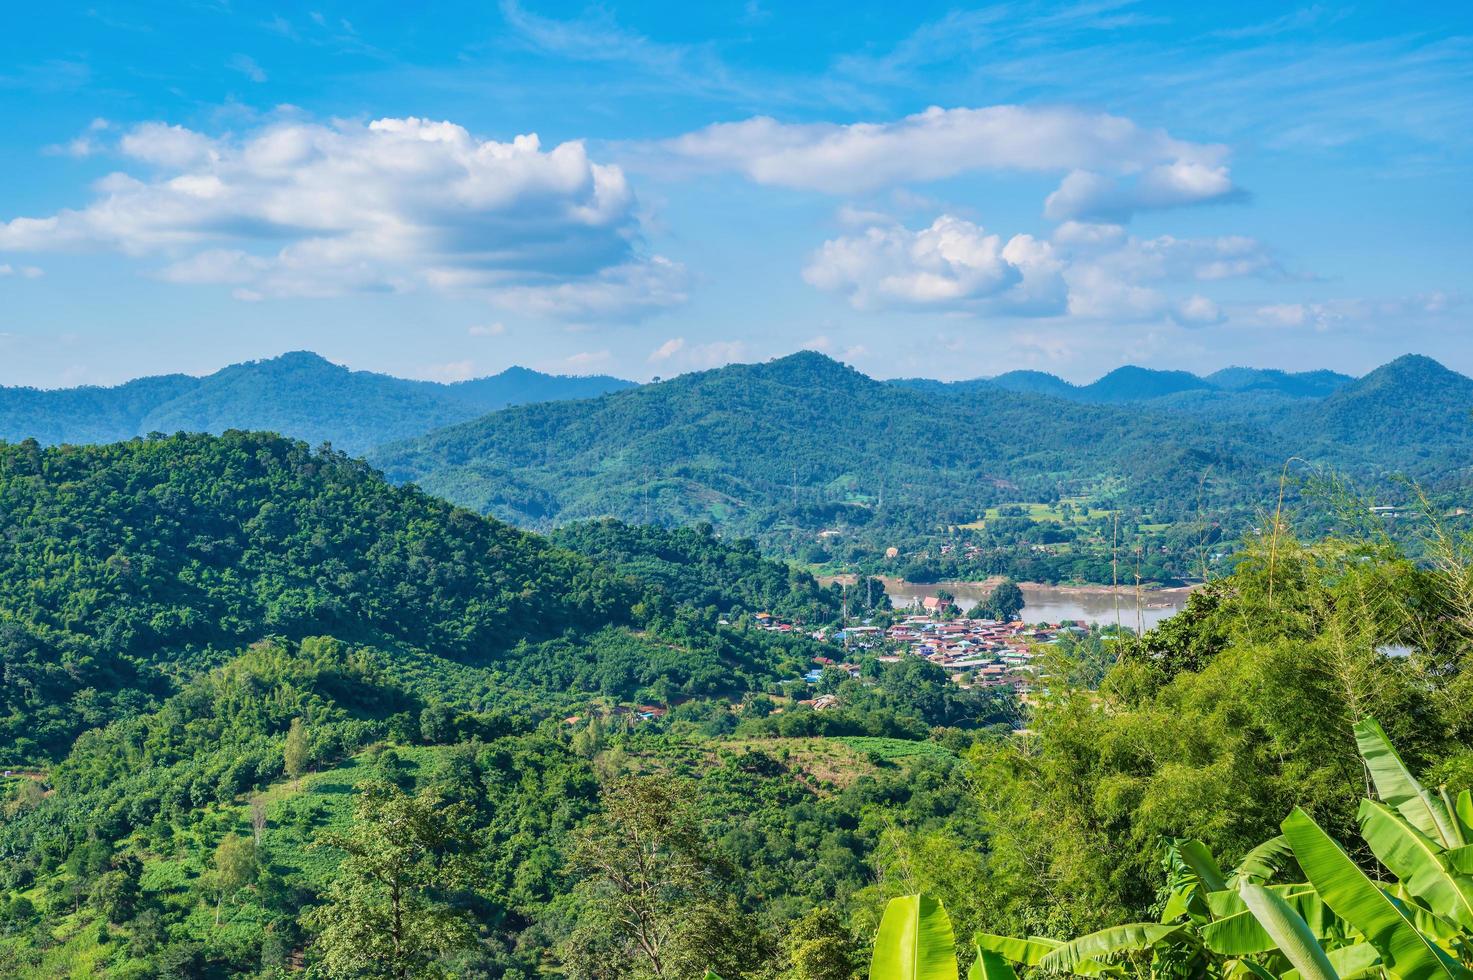 Beautiful landscape view on Phu Lamduan at loei thailand.Phu Lamduan is a new tourist attraction and viewpoint of mekong river between thailand and loas. photo